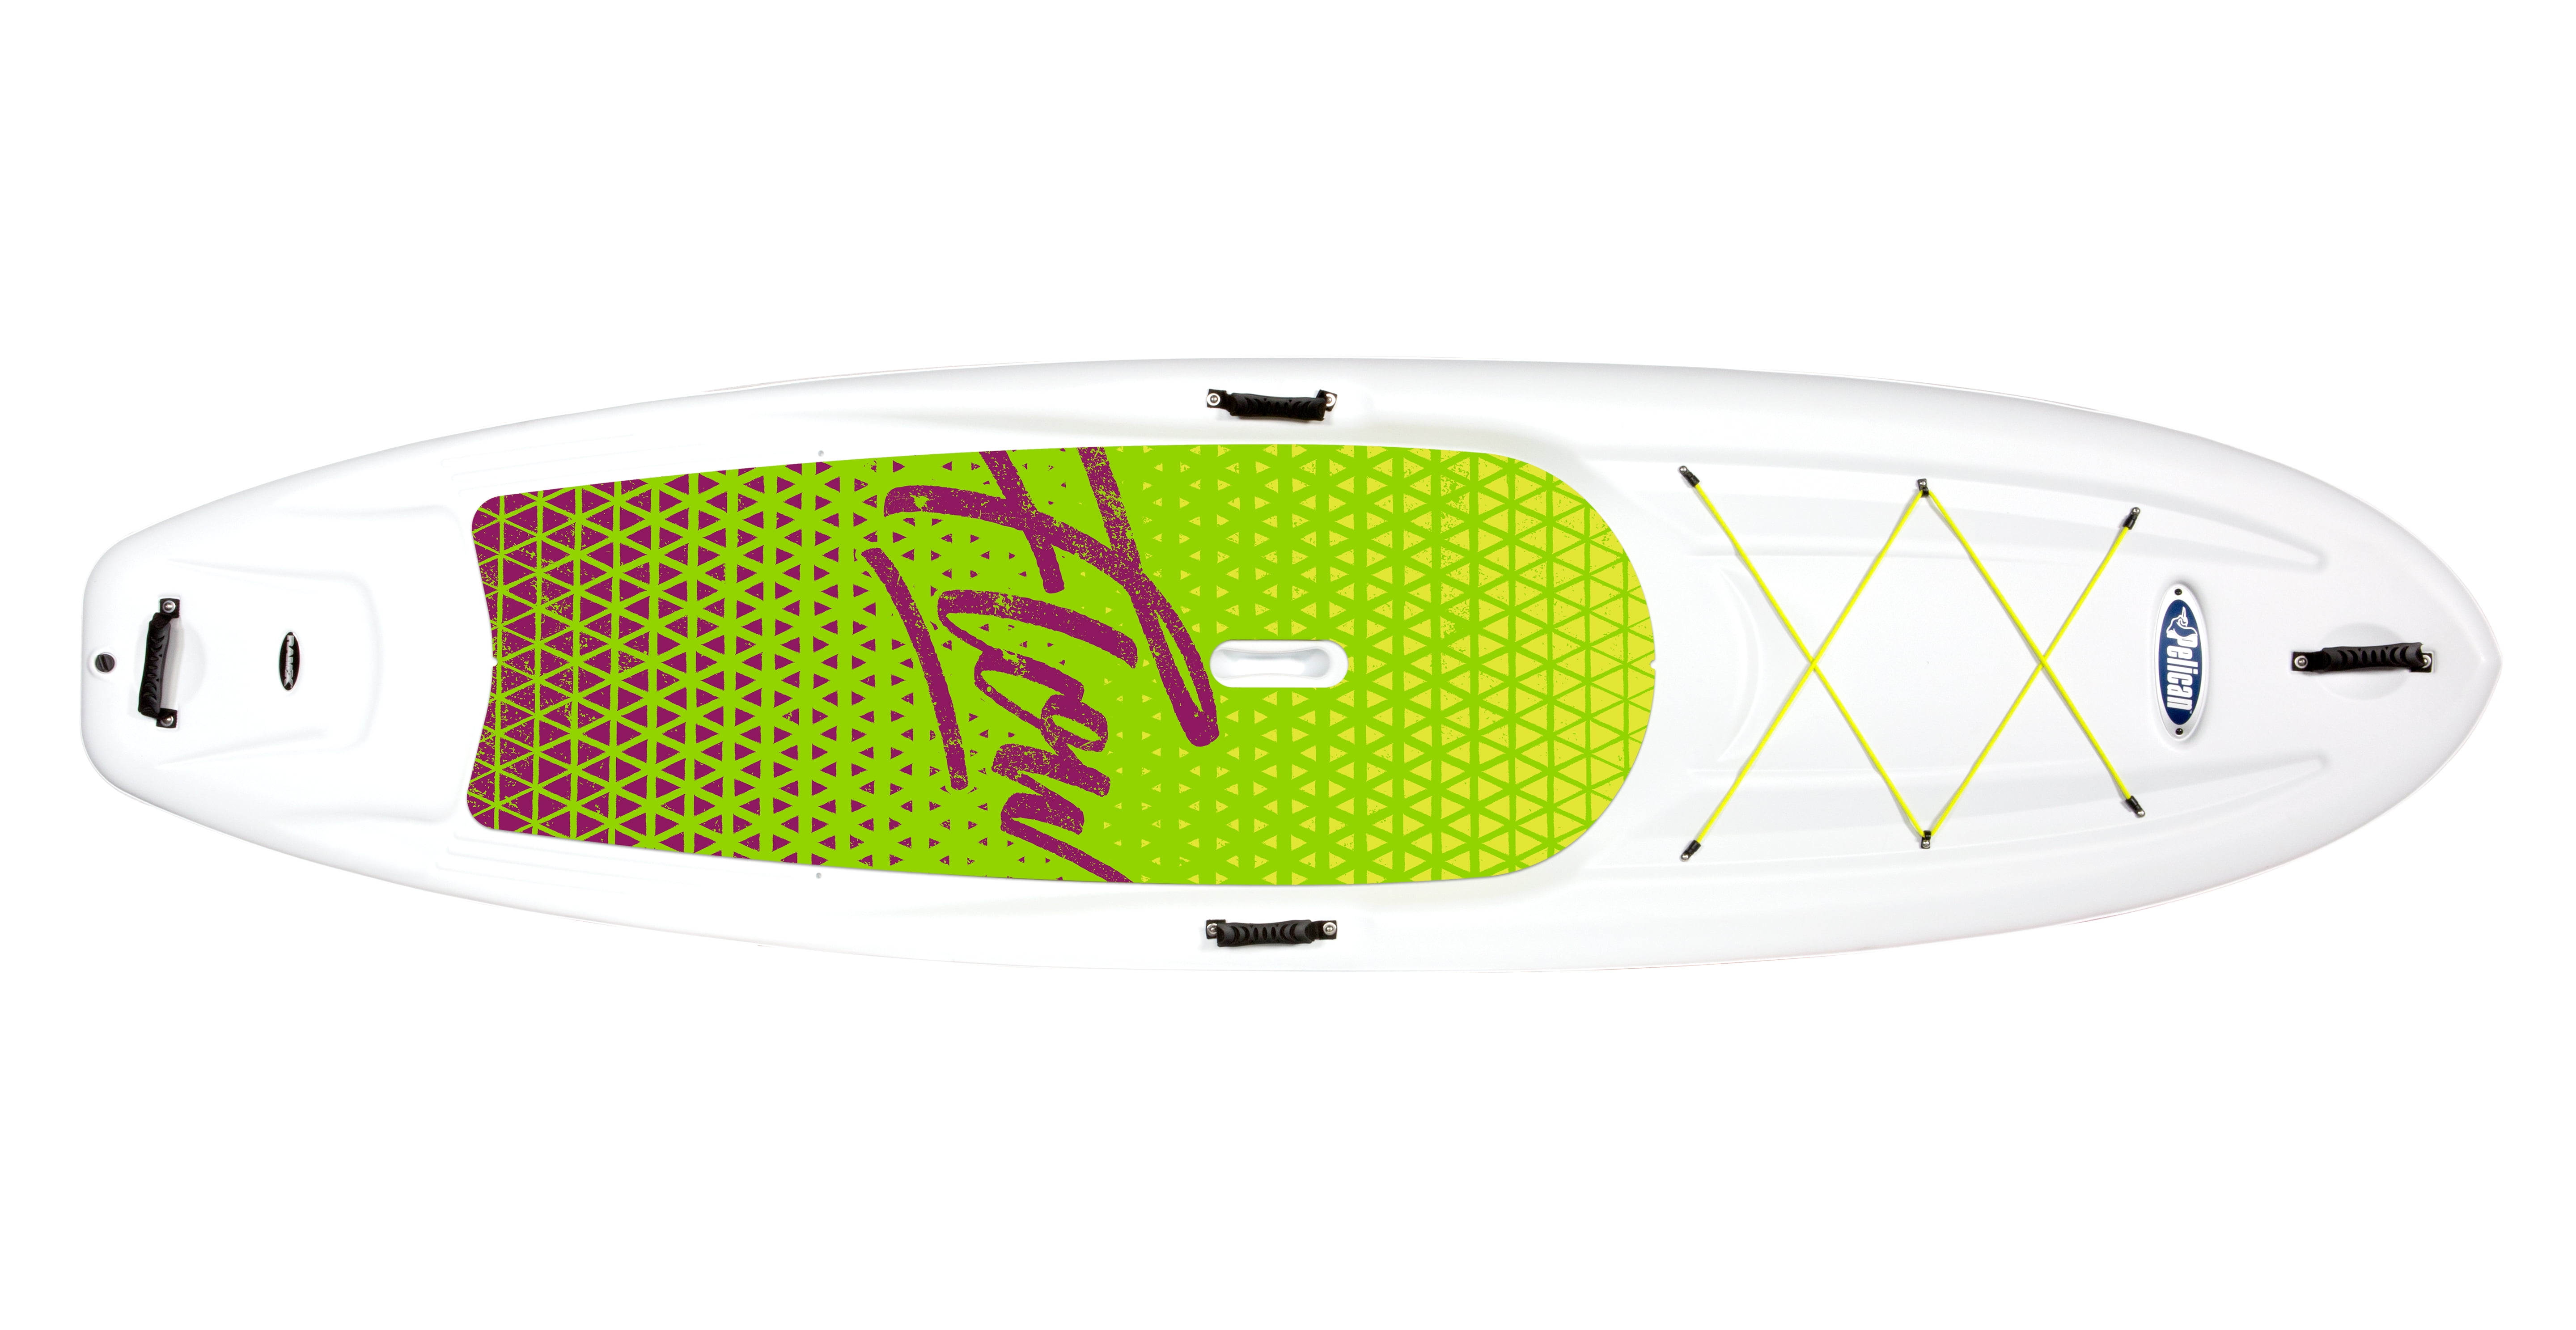 Hardshell Stand-Up Paddleboard Lime White SUP Board Flow 106 Lightweight Board with a Bottom Fin for Paddling SUP Pelican 106 Perfect for Youth & Adult FAA10P109-00 Non-Slip Deck 